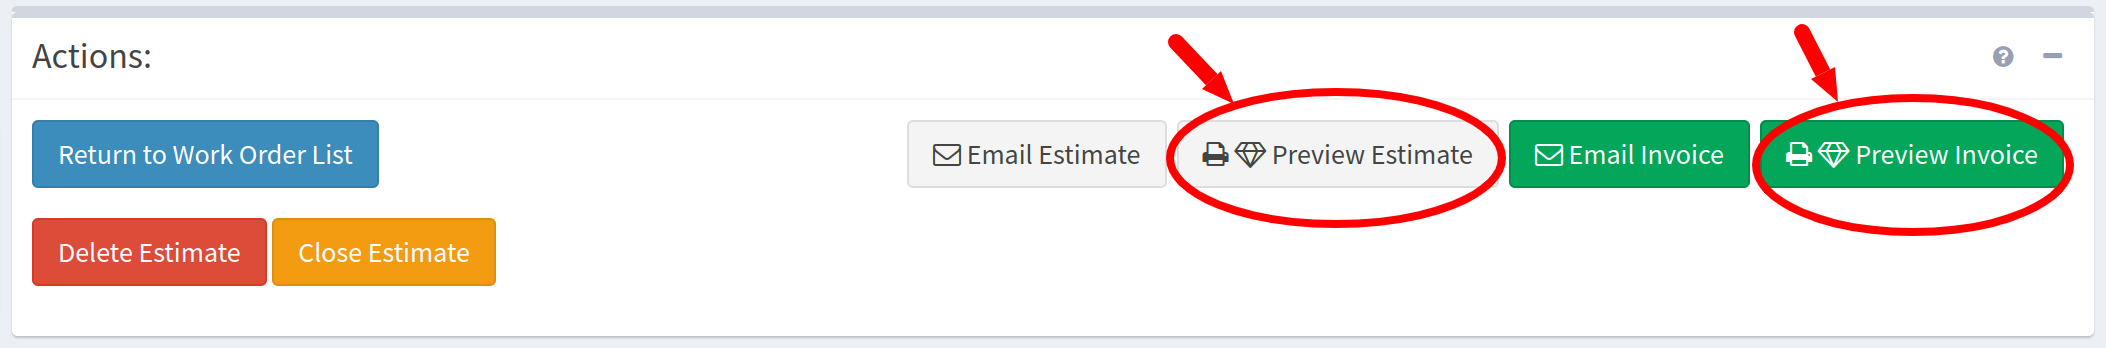 Location of the Preview estimate and Preview invoice buttons.